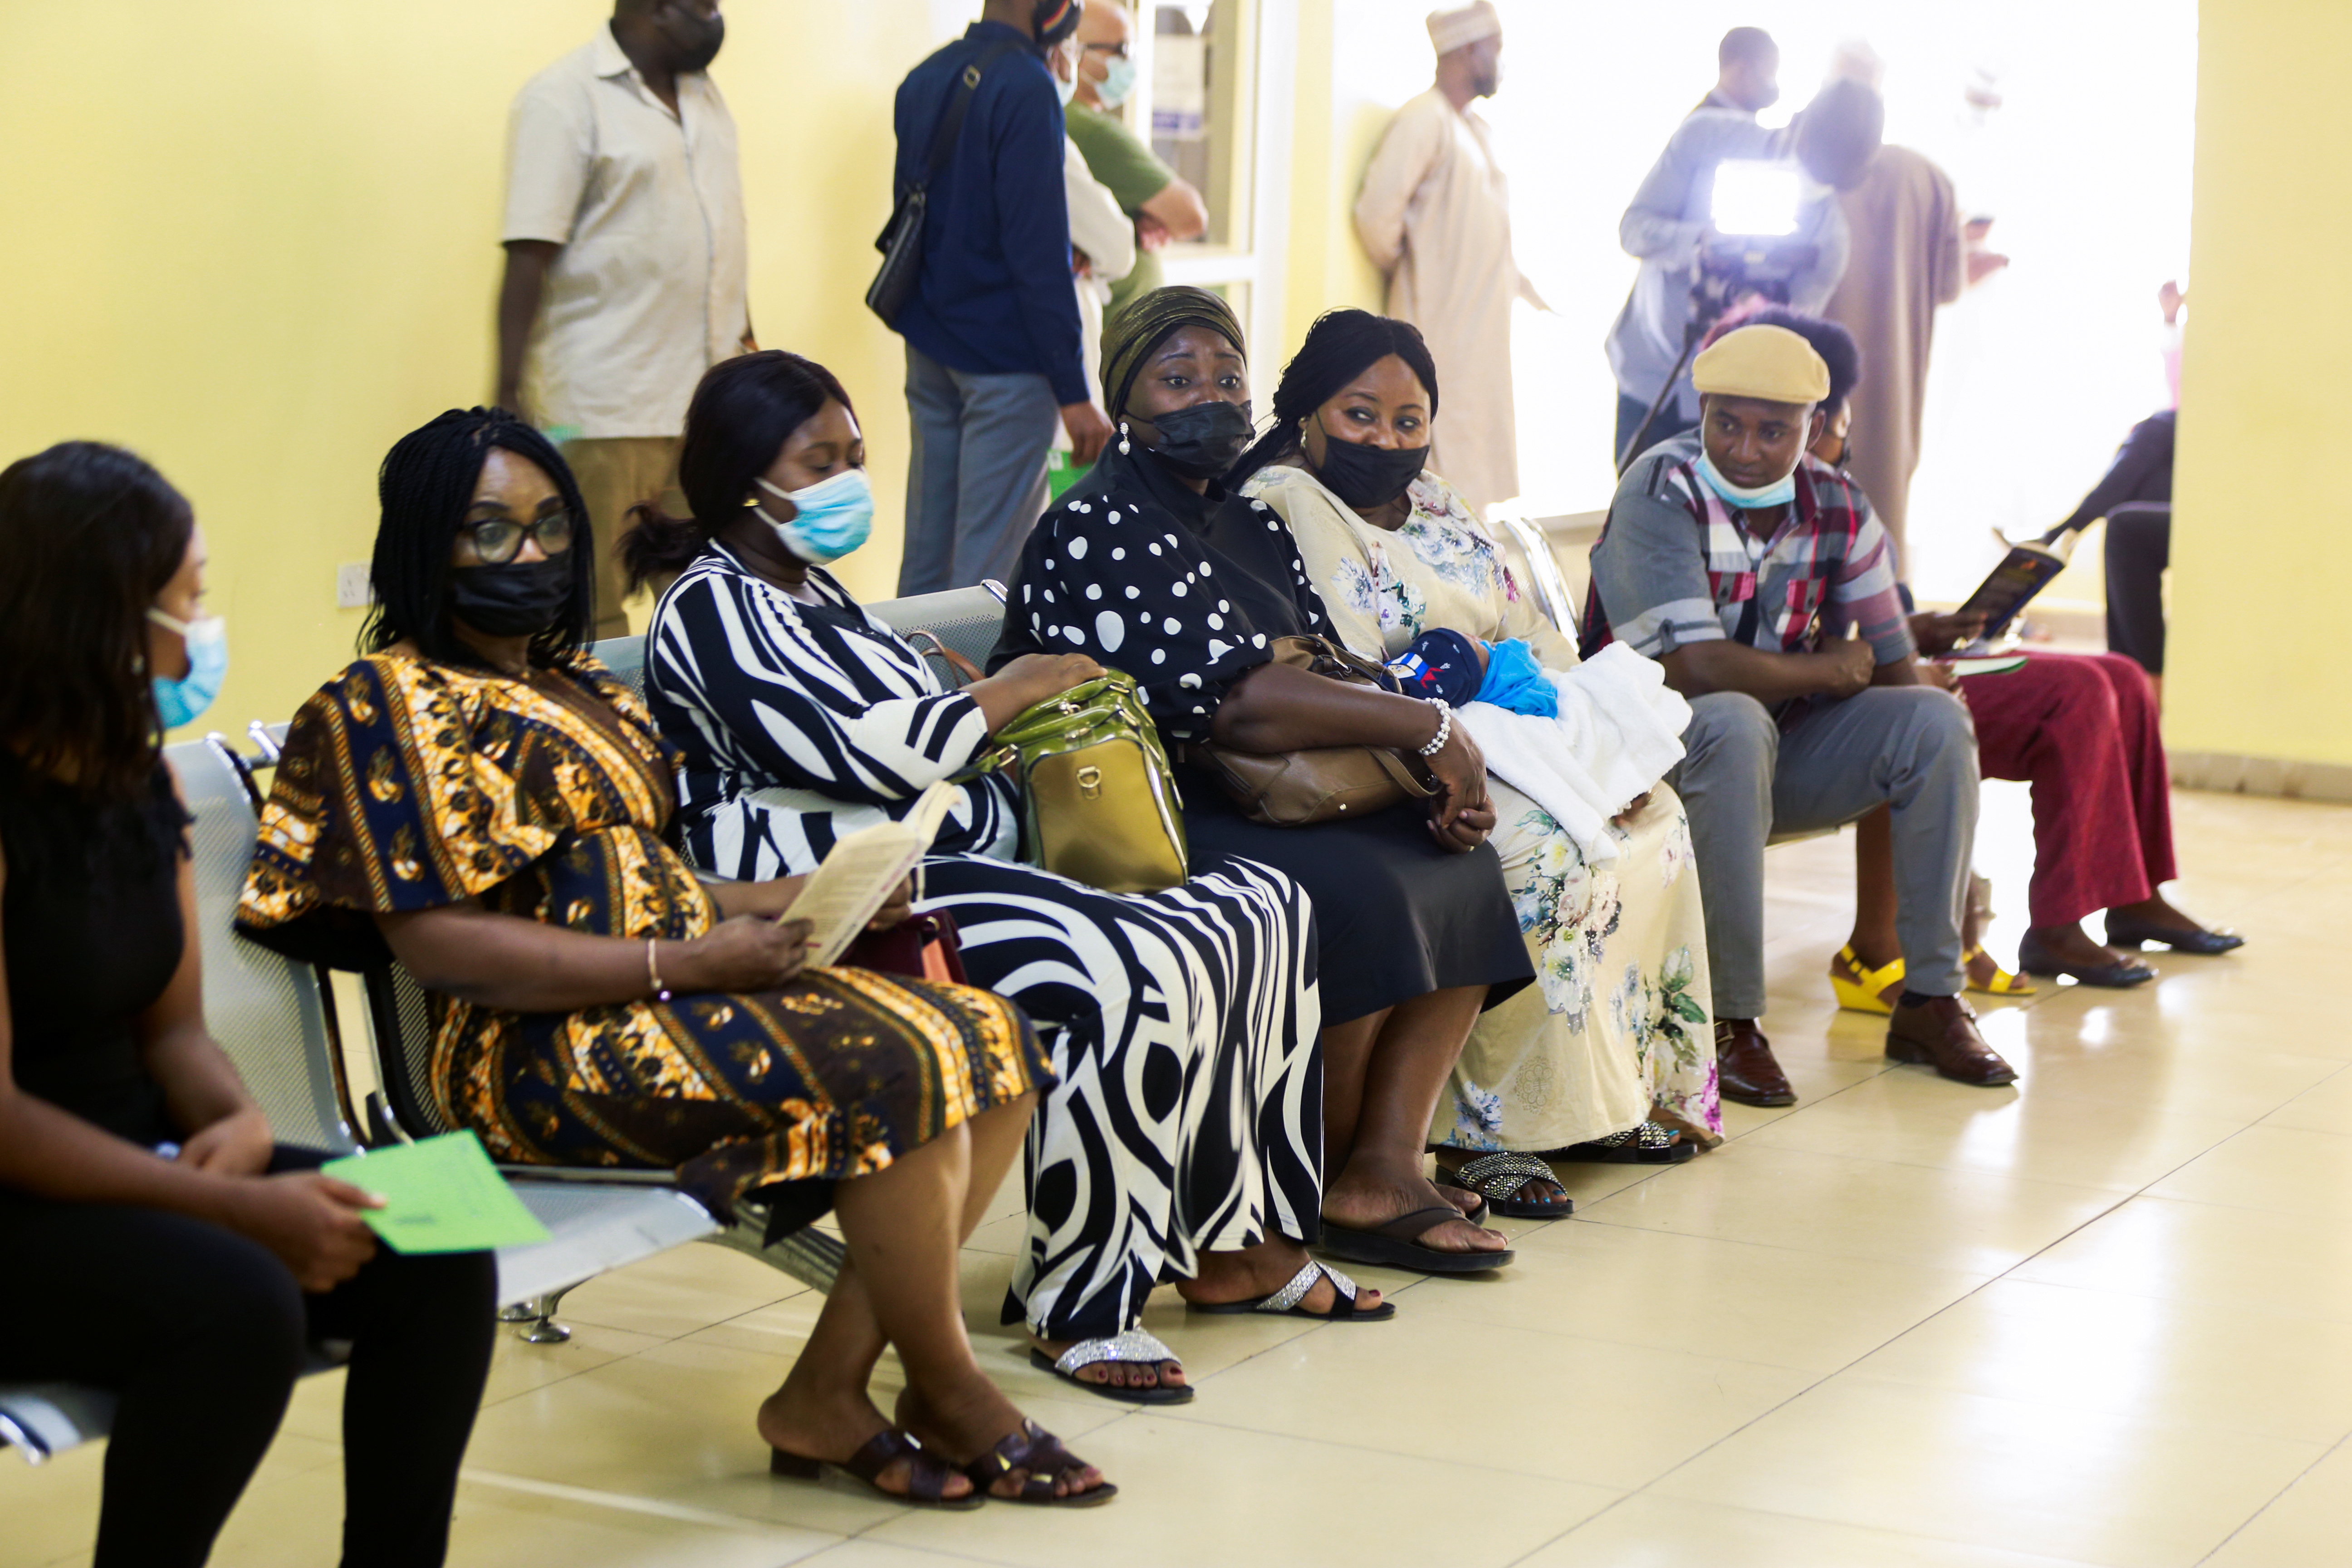 People wait after receiving the AstraZeneca's COVID-19 vaccine at the National Hospital in Abuja, Nigeria March 31, 2021. REUTERS/Afolabi Sotunde